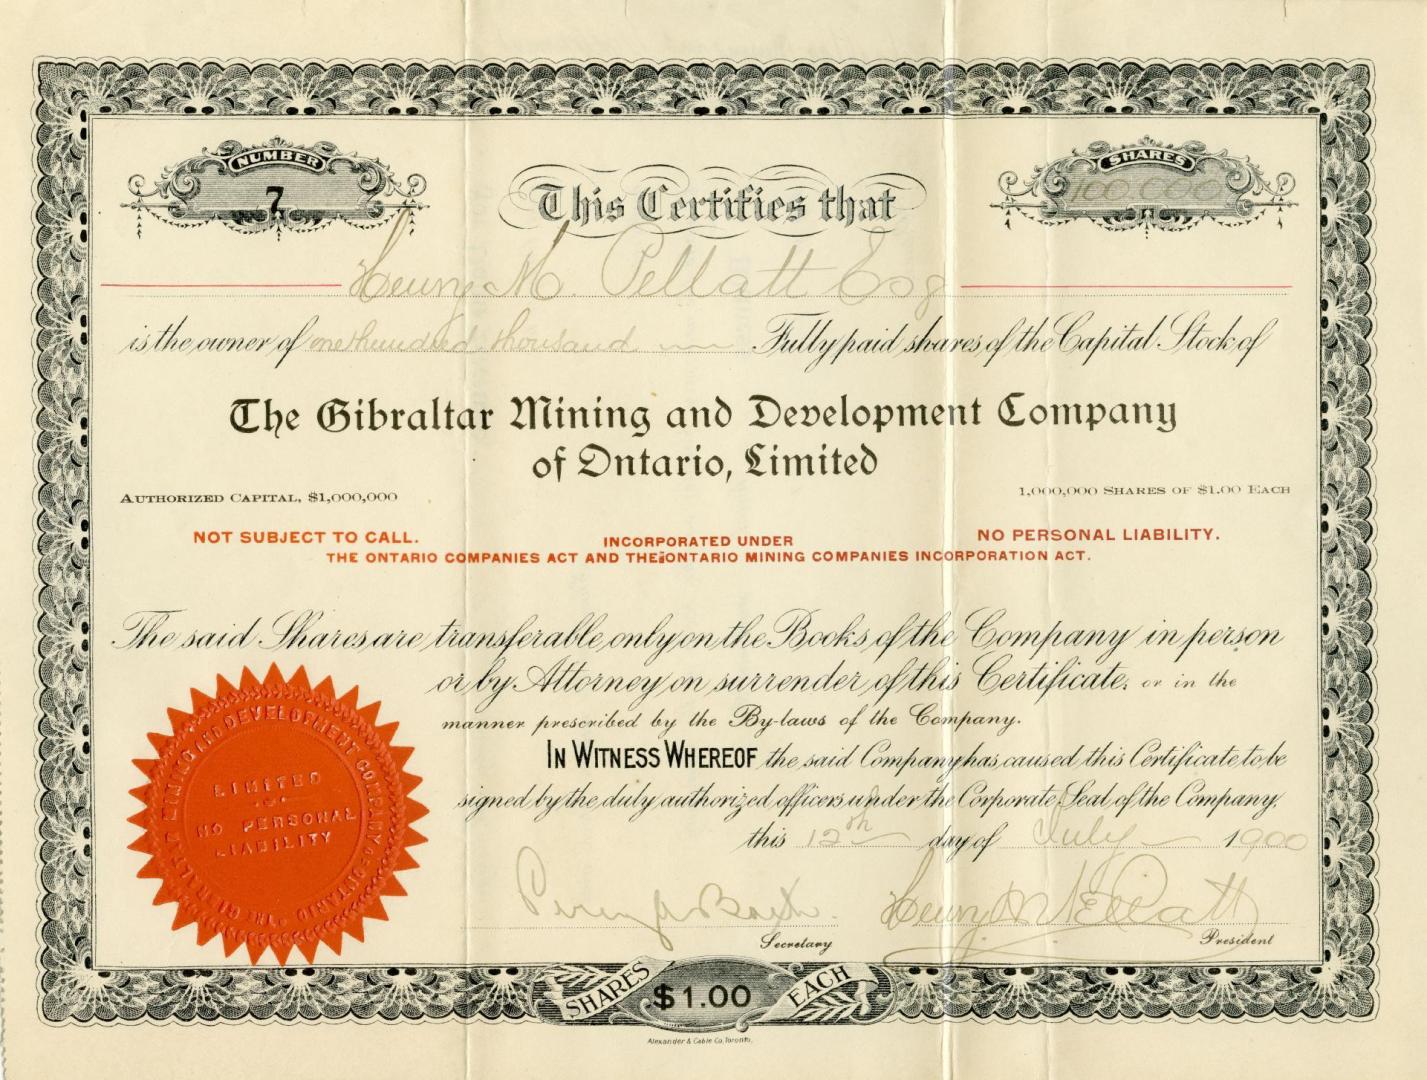 This certifies that Henry M. Pellatt, Esq. is the owner of one hundred thousand fully paid shares of the capital stock of The Gibraltar Mining and Development Company of Ontario Limited